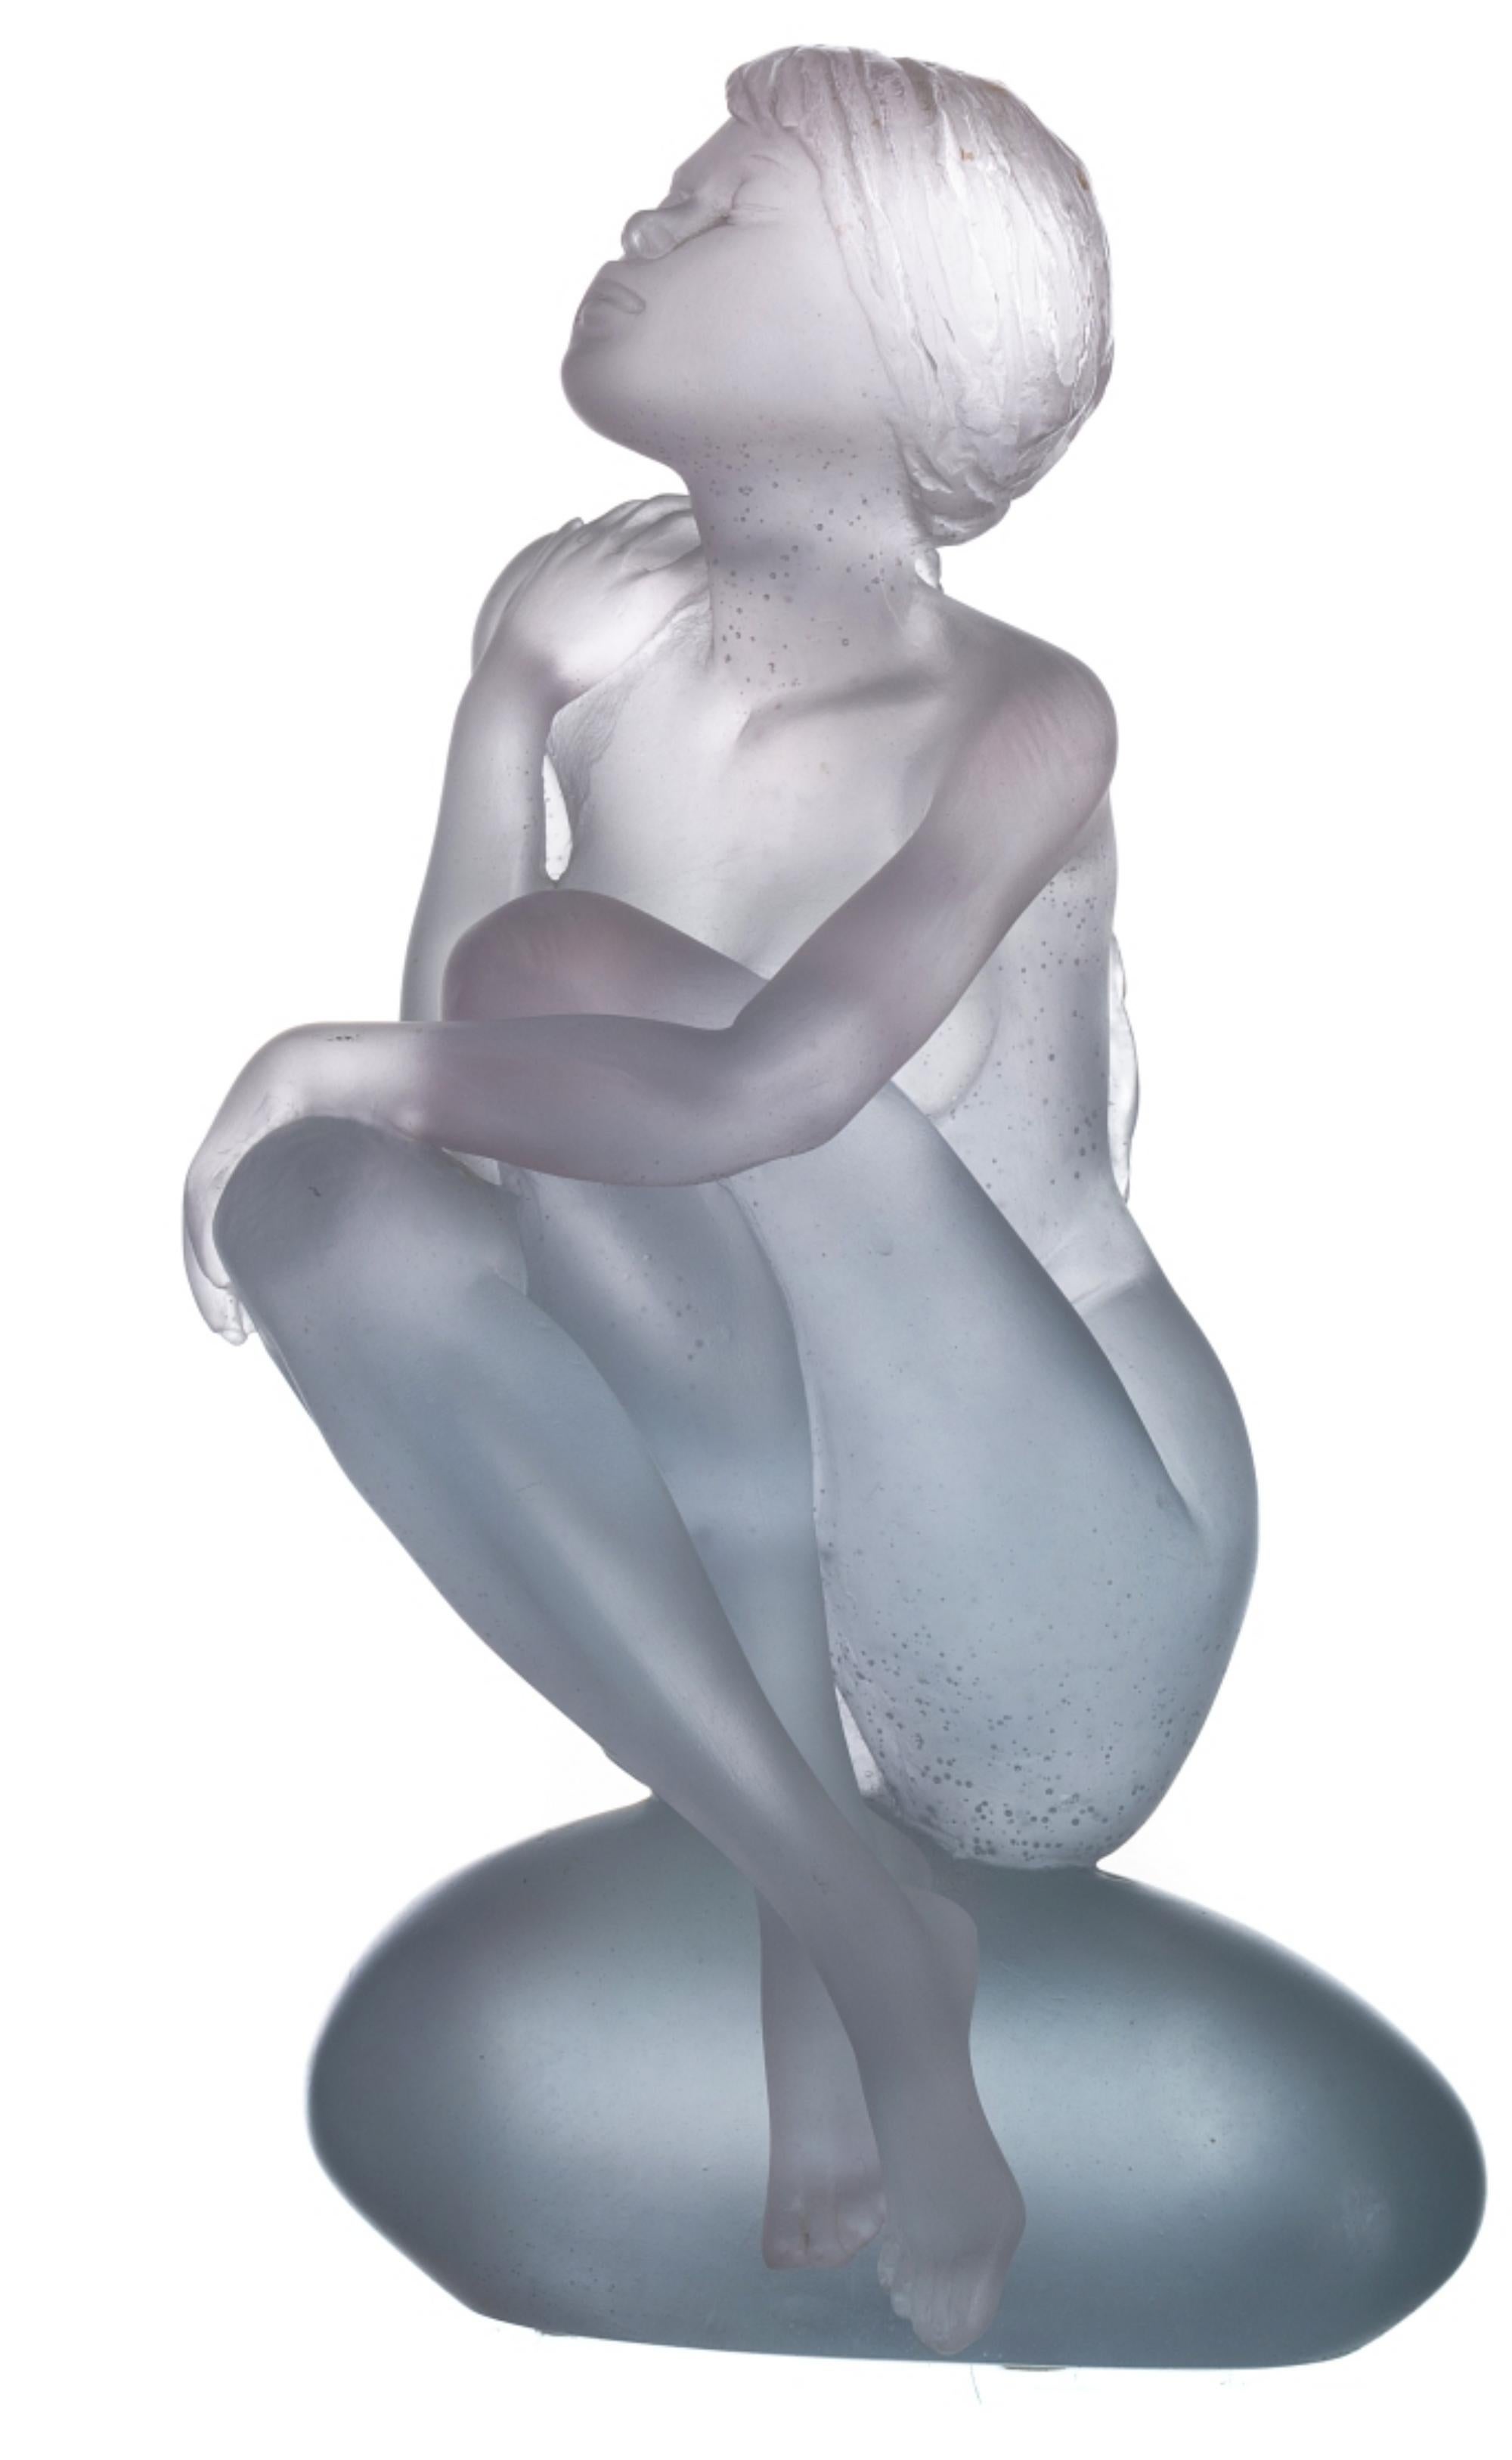 Deville Chabrolle sculpture
'Aphrodite' model in molded and embossed crystal paste, blue color, edition 235/475, signed 'Daum, France', by sculptor Deville Chabrolle.
Dimensions: (height) 30 cm.